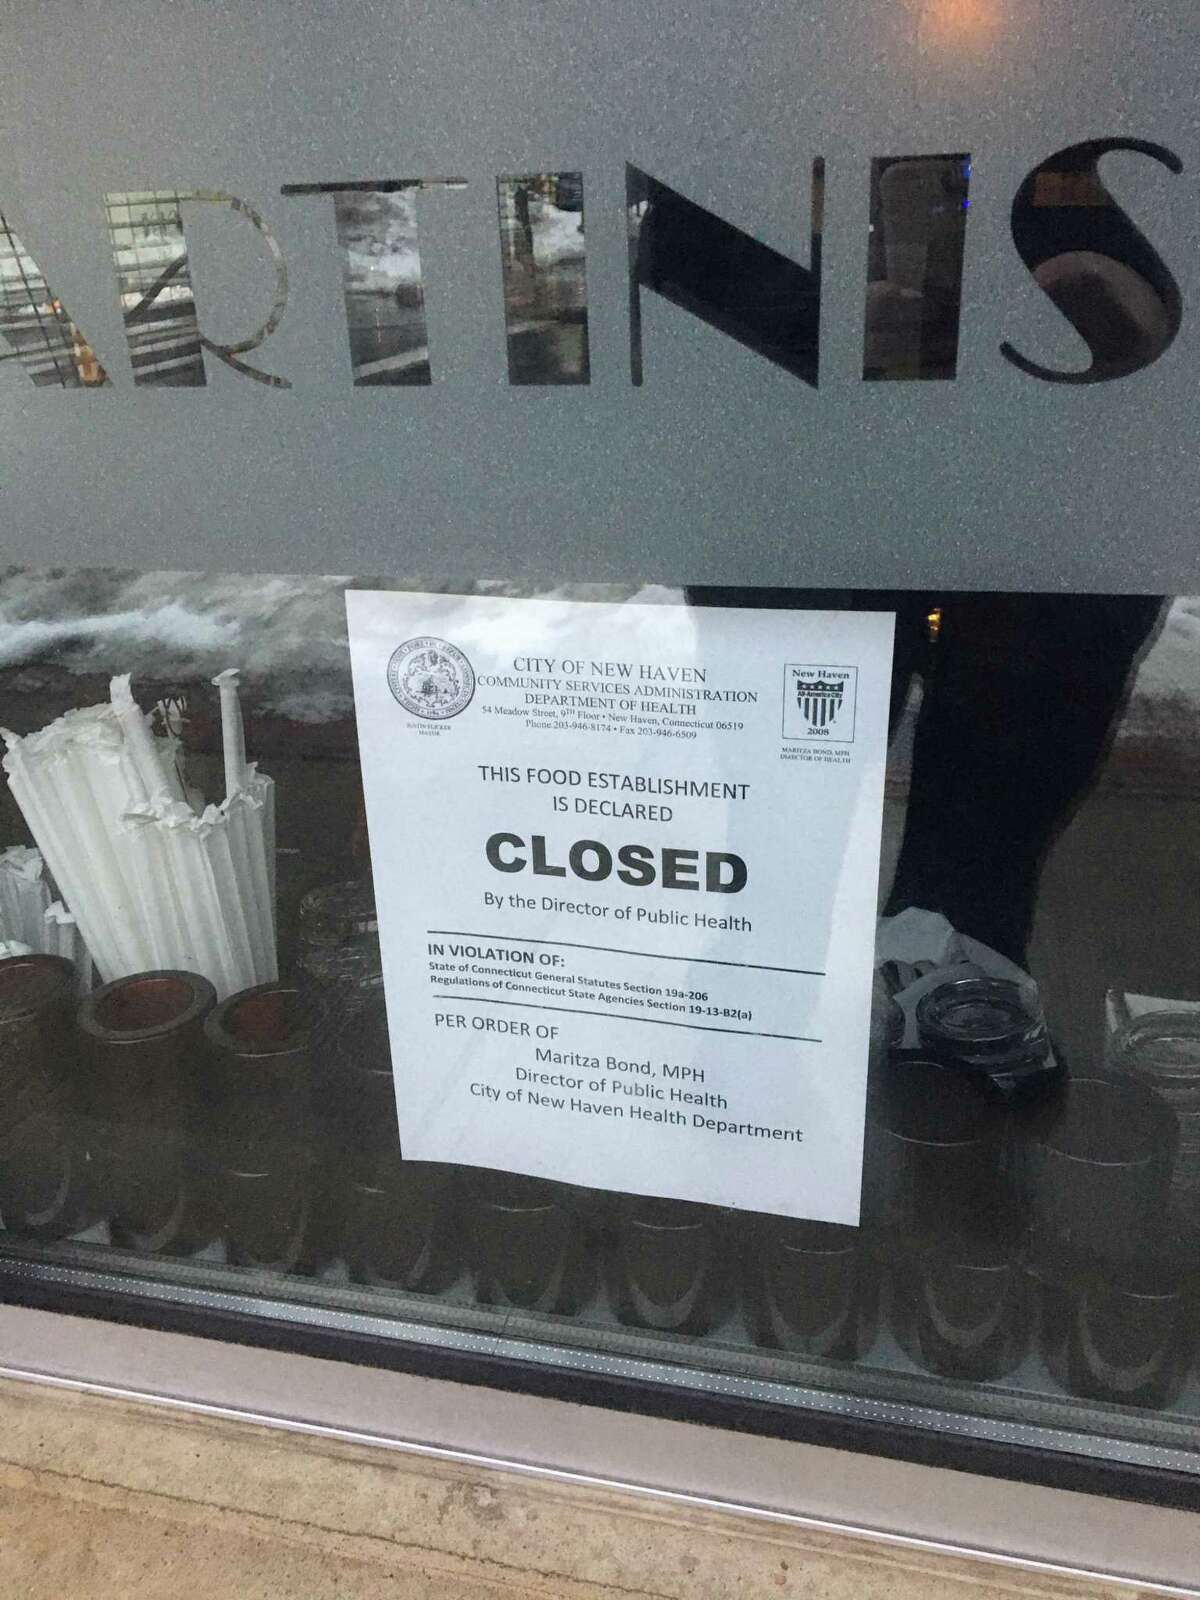 New Haven Health Department closure notices have been posted on the doors of Jack's Steakhouse, site of three suspected drug overdoses on Feb. 15, two of which were fatal. The restaurant was ordered closed until it submits and the city approves a corrective action plan, and official said.